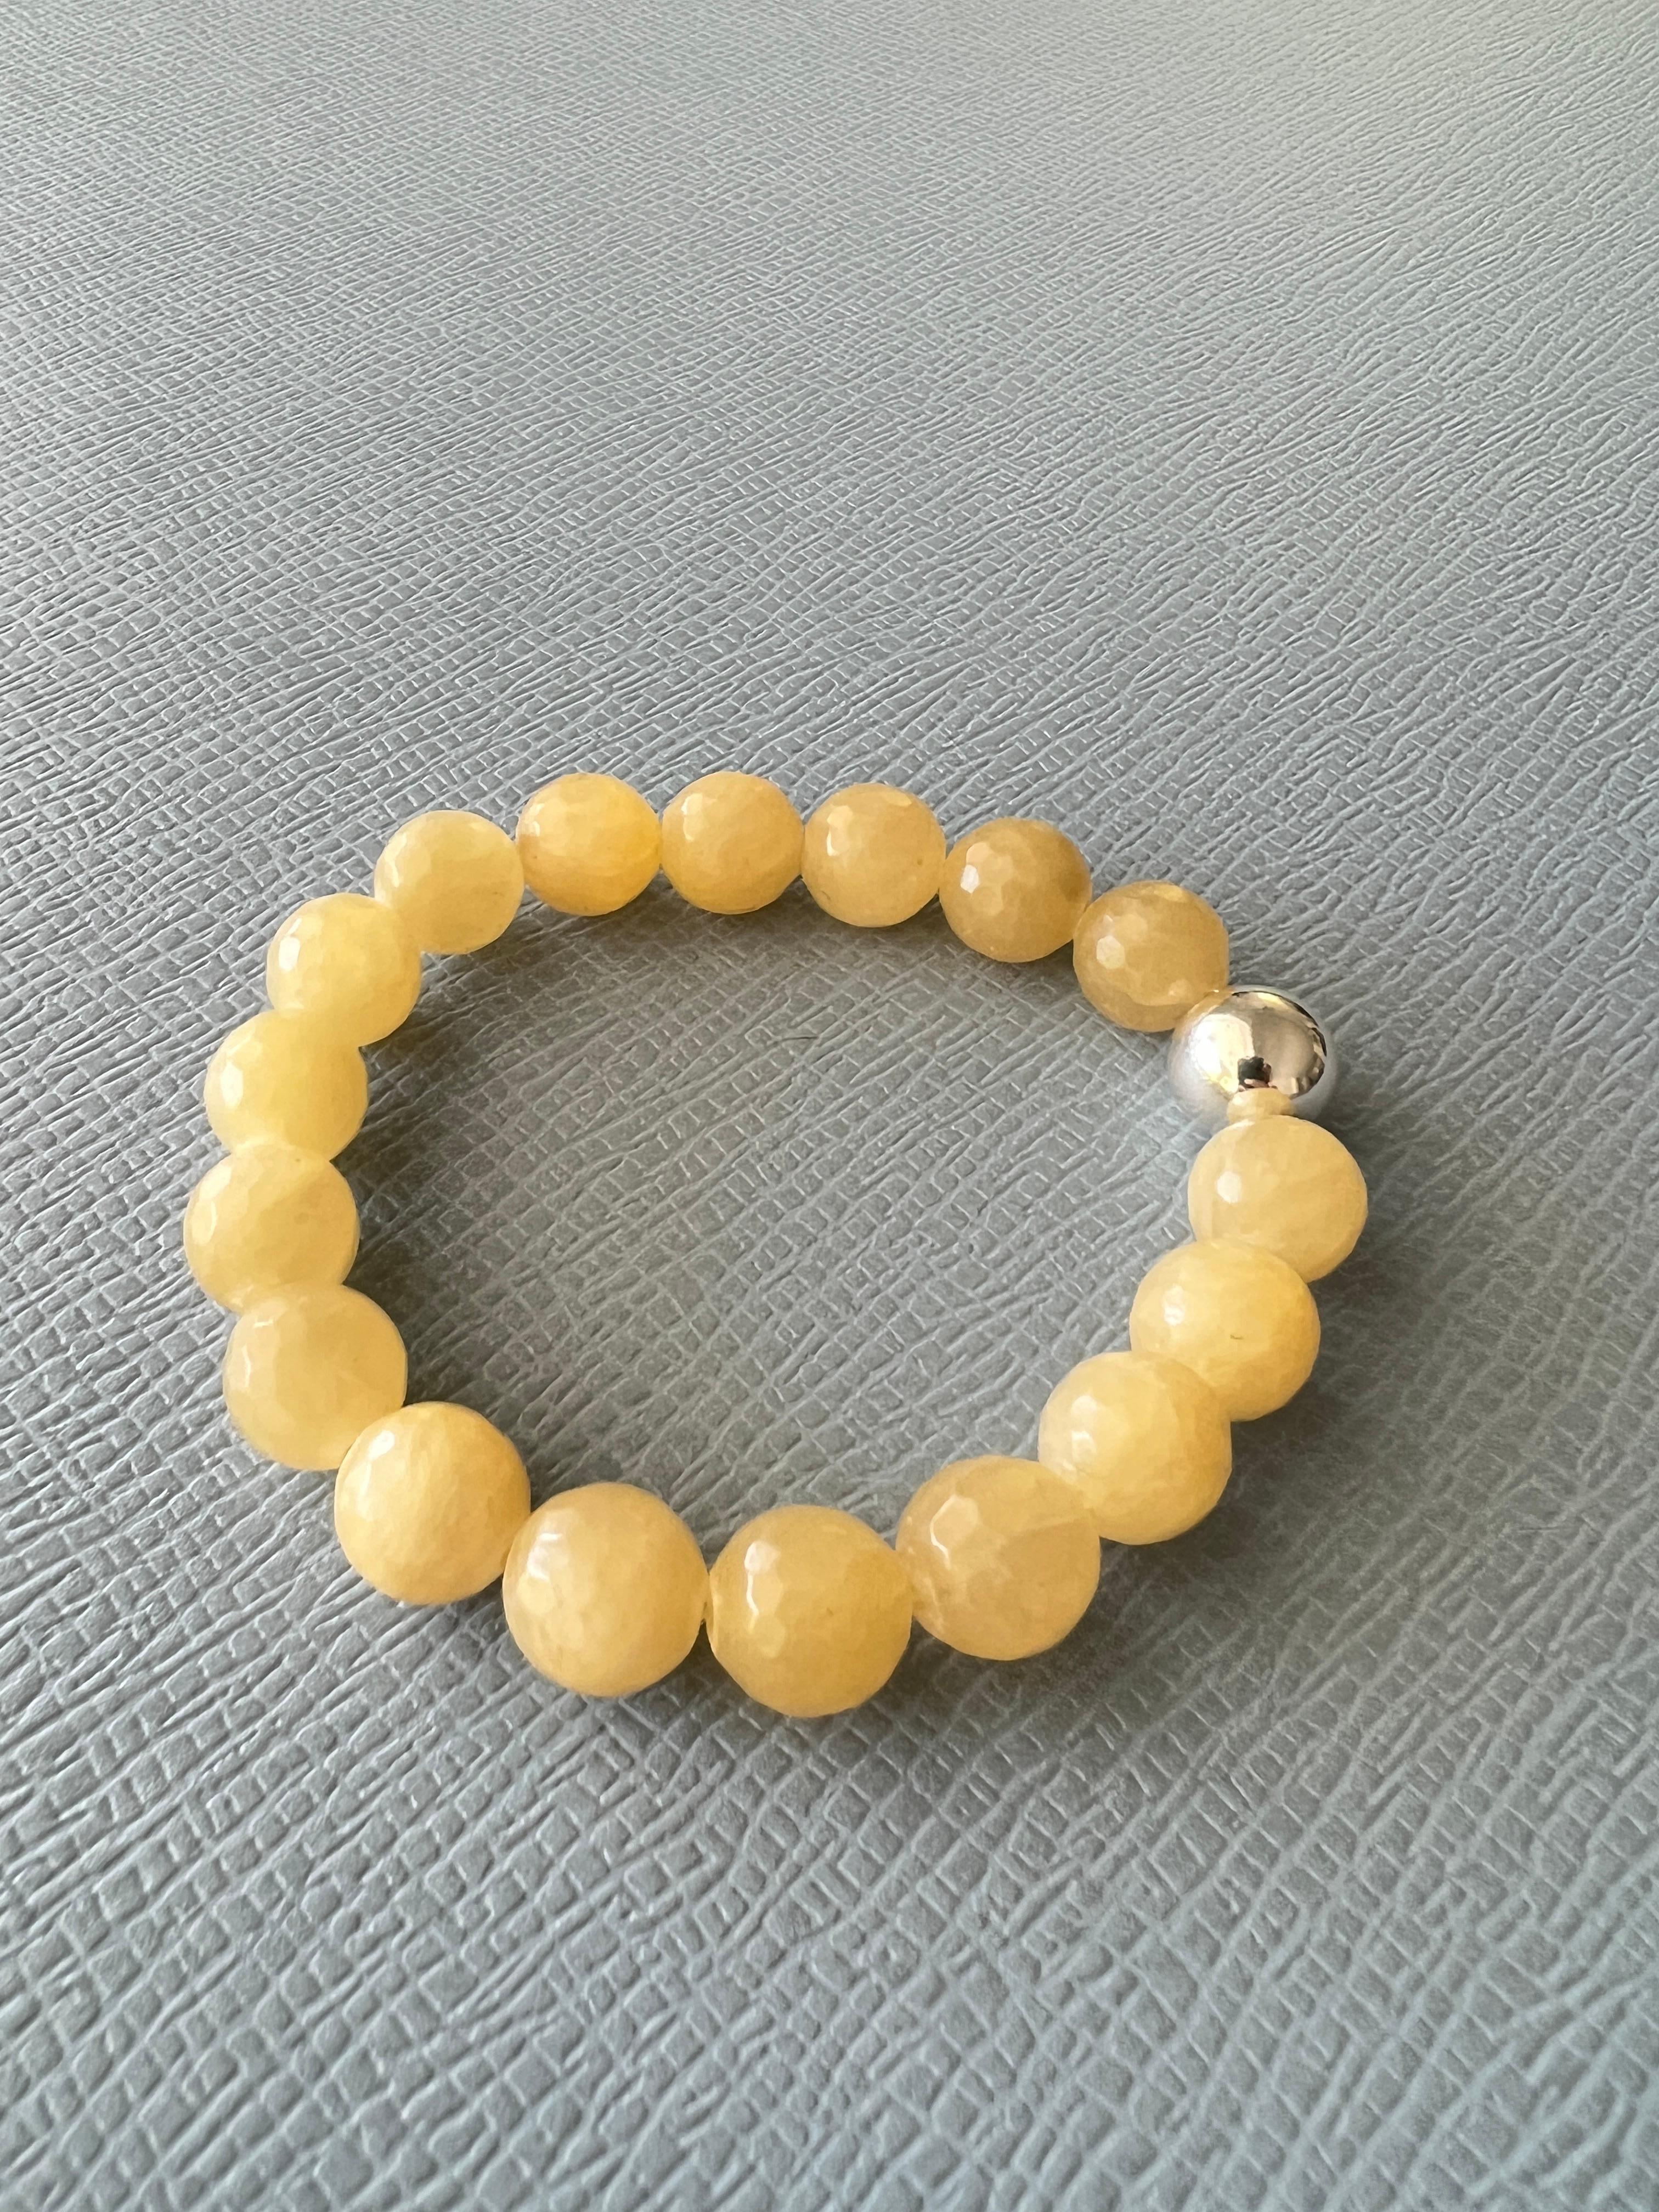 Yellow Calcite Round Facteted Bead Bracelet Silver J Dauphin For Sale 3